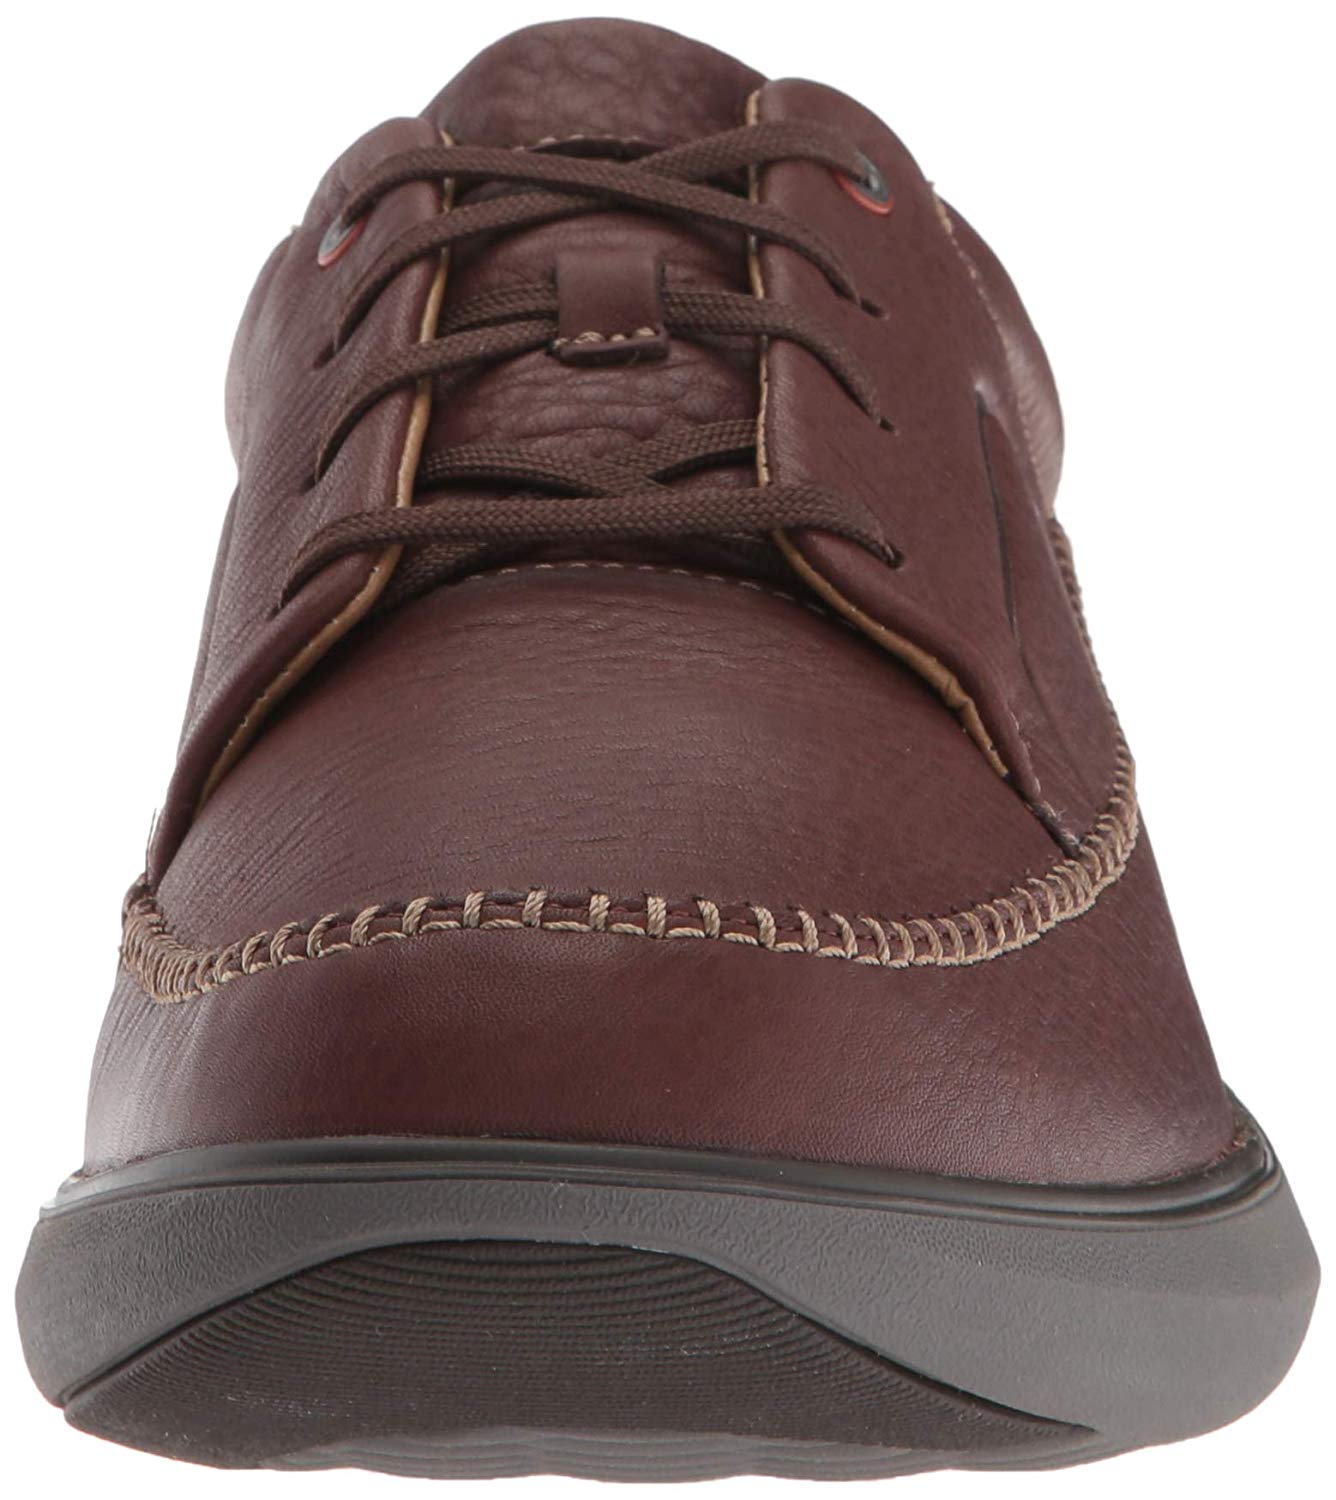 Clarks Mens Un Rise Low Top Lace Up Fashion Sneakers, Brown, Size 11.5 ...